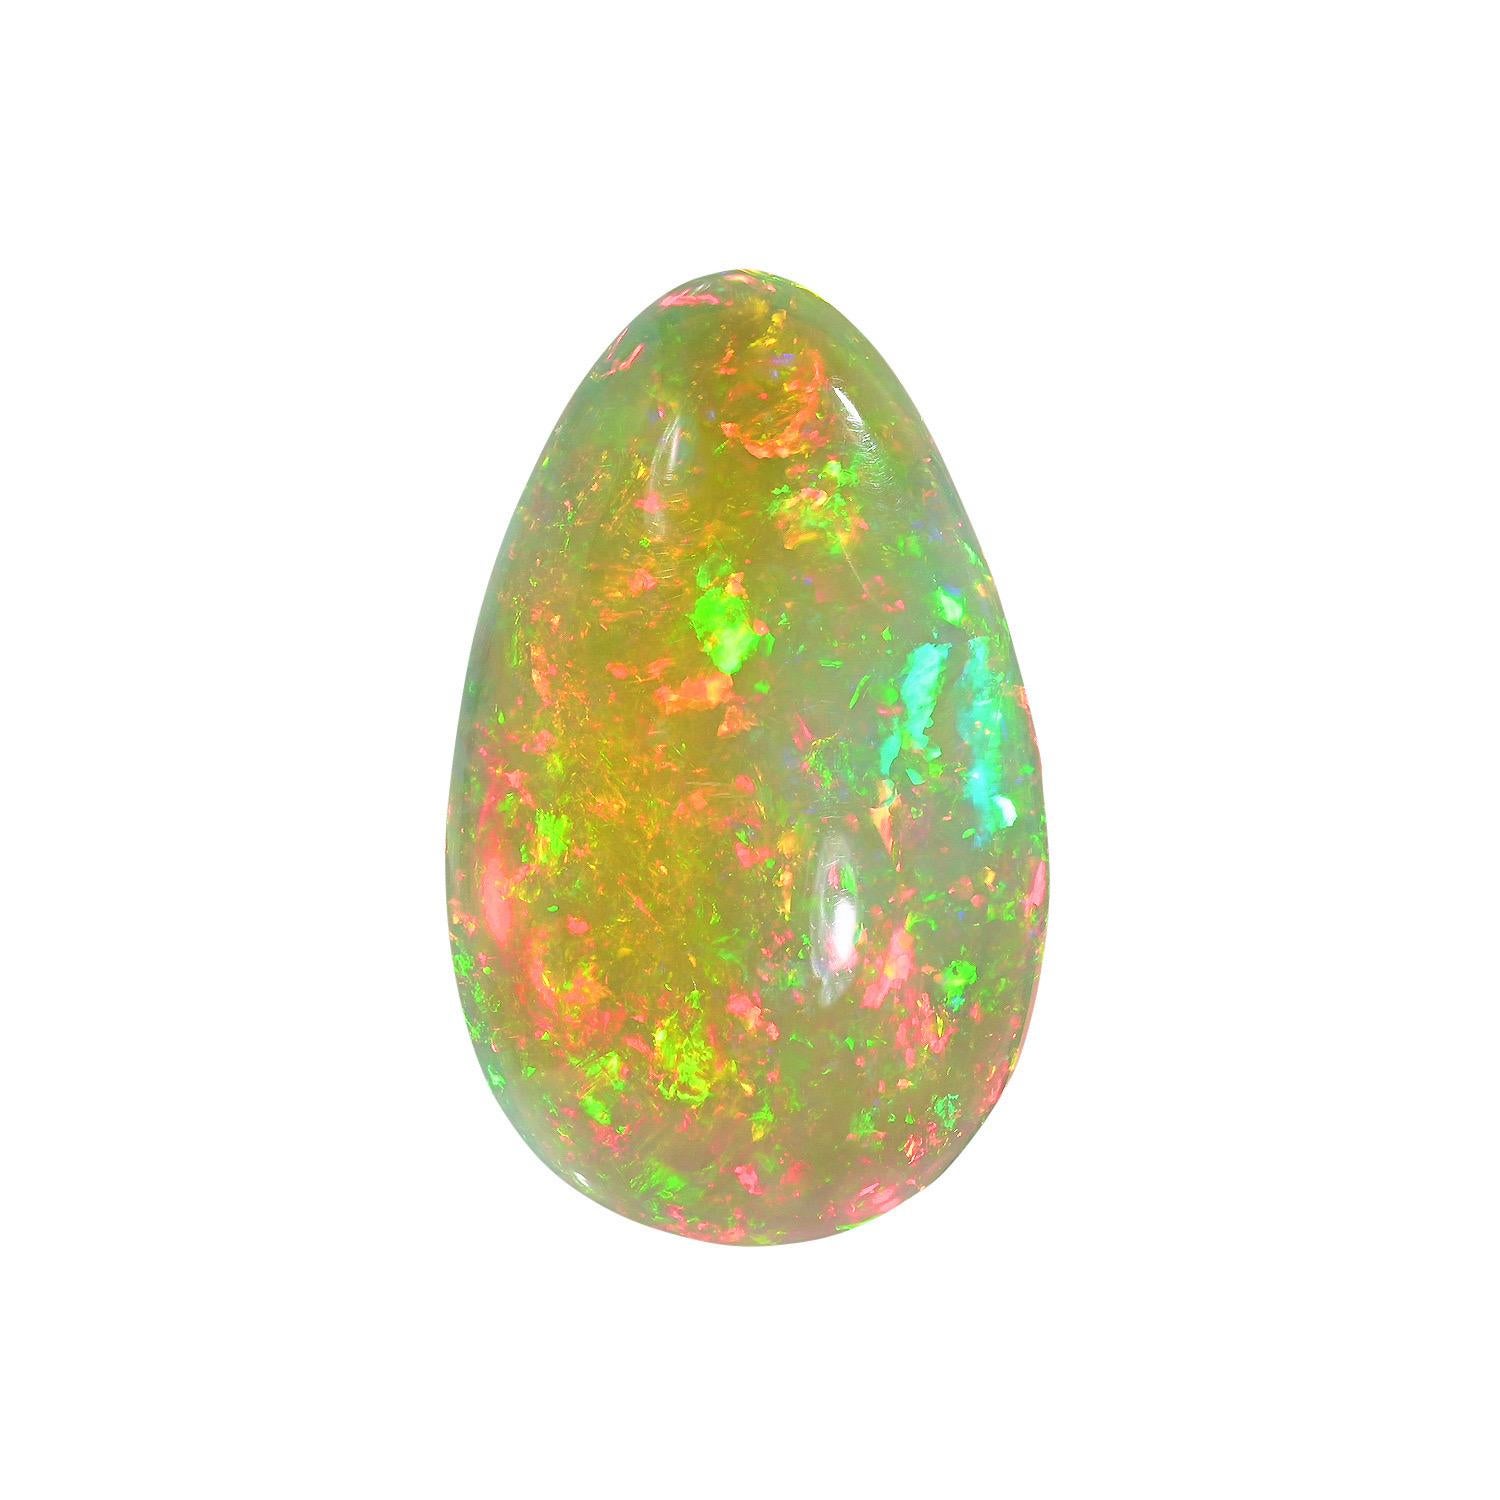 Natural 22.17 Carat Ethiopian Opal pear shaped loose gemstone, offered unmounted to a fine gem lover.
Returns are accepted and paid by us within 7 days of delivery.
We offer supreme custom jewelry work upon request. Please contact us for more